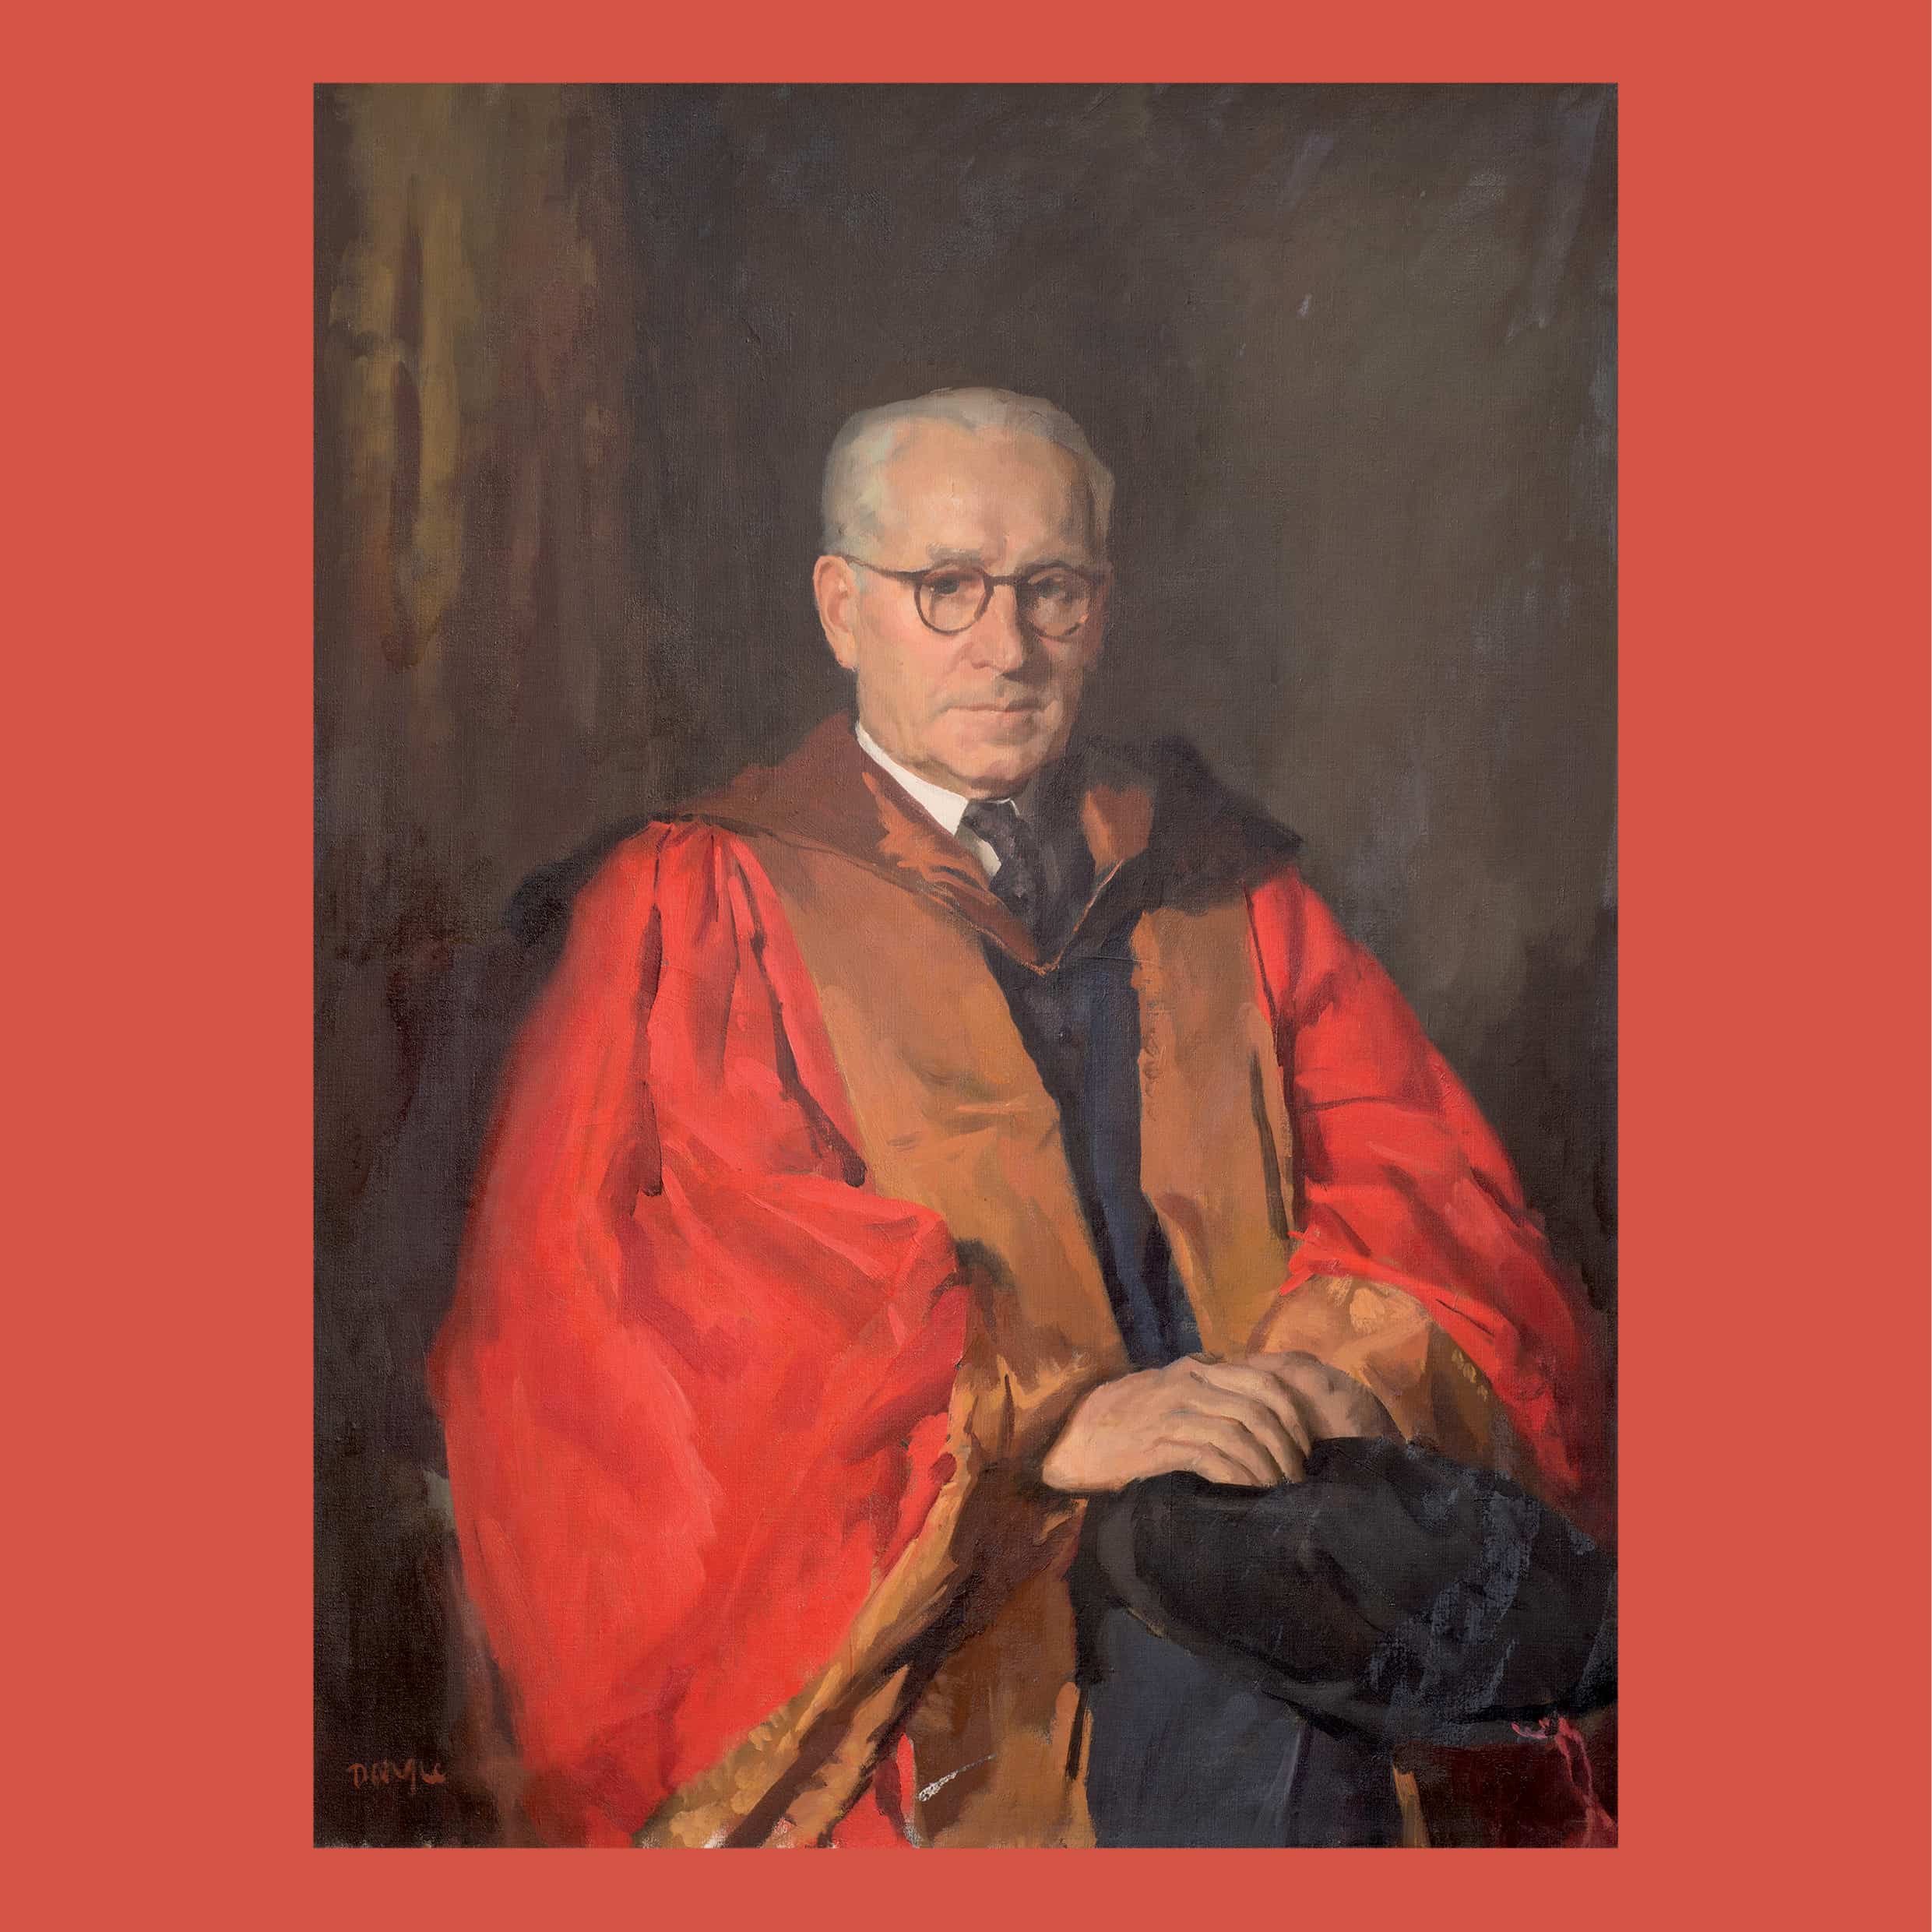  William Dargie (Australian, 1912–2003), William John Tuckfield, 1951, oil on canvas,  sight 100.0 × 73.8 cm. 1951.0004, gift of the dental profession 1951, University of Melbourne Art Collection. 
